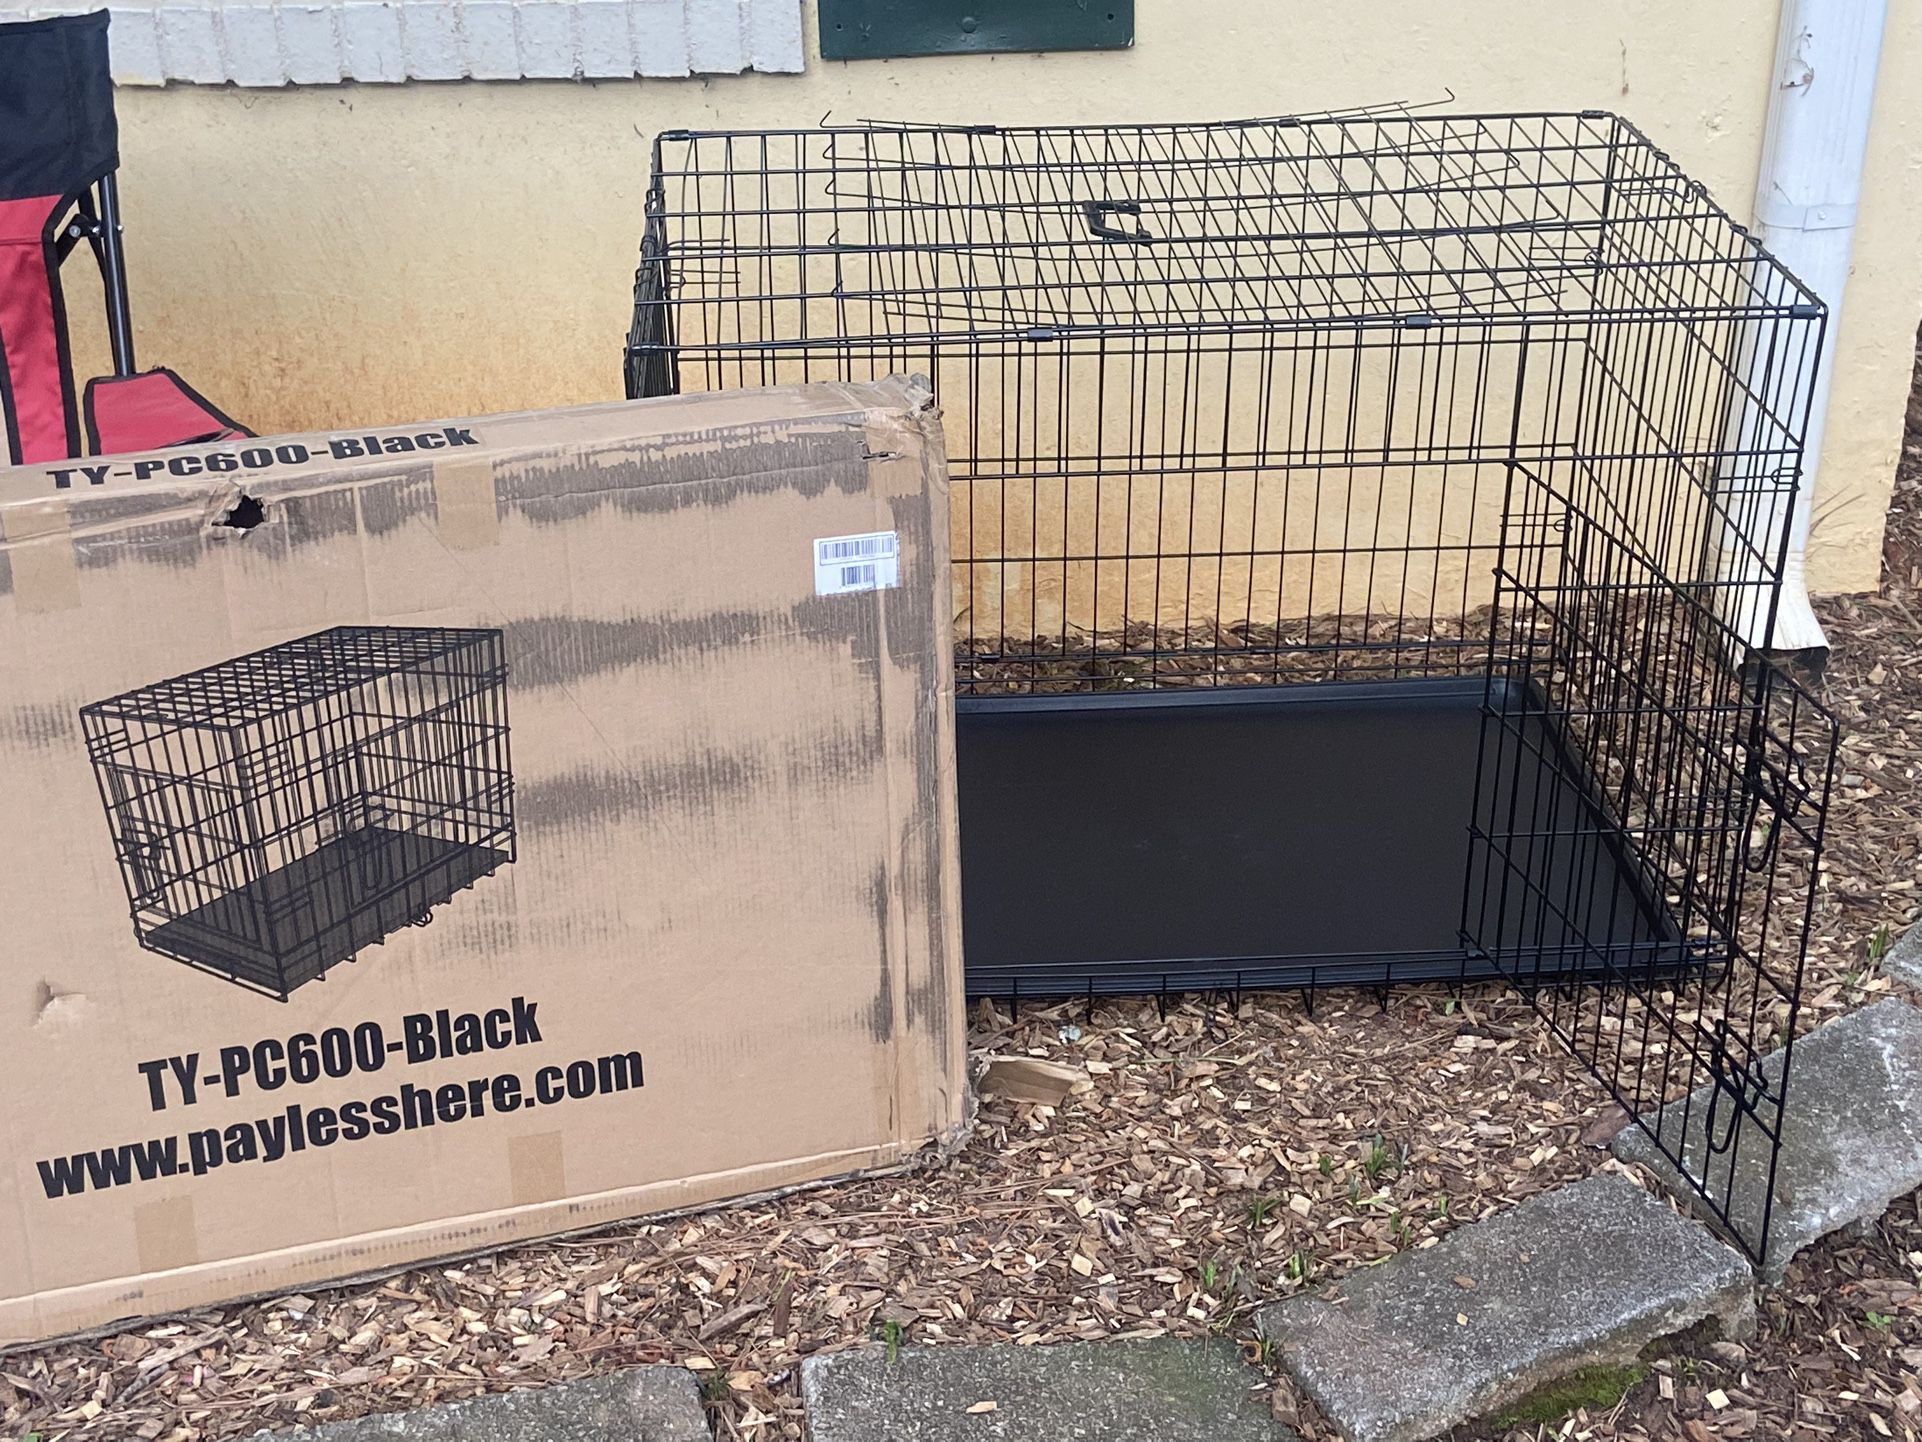 Medium cages For Dogs 